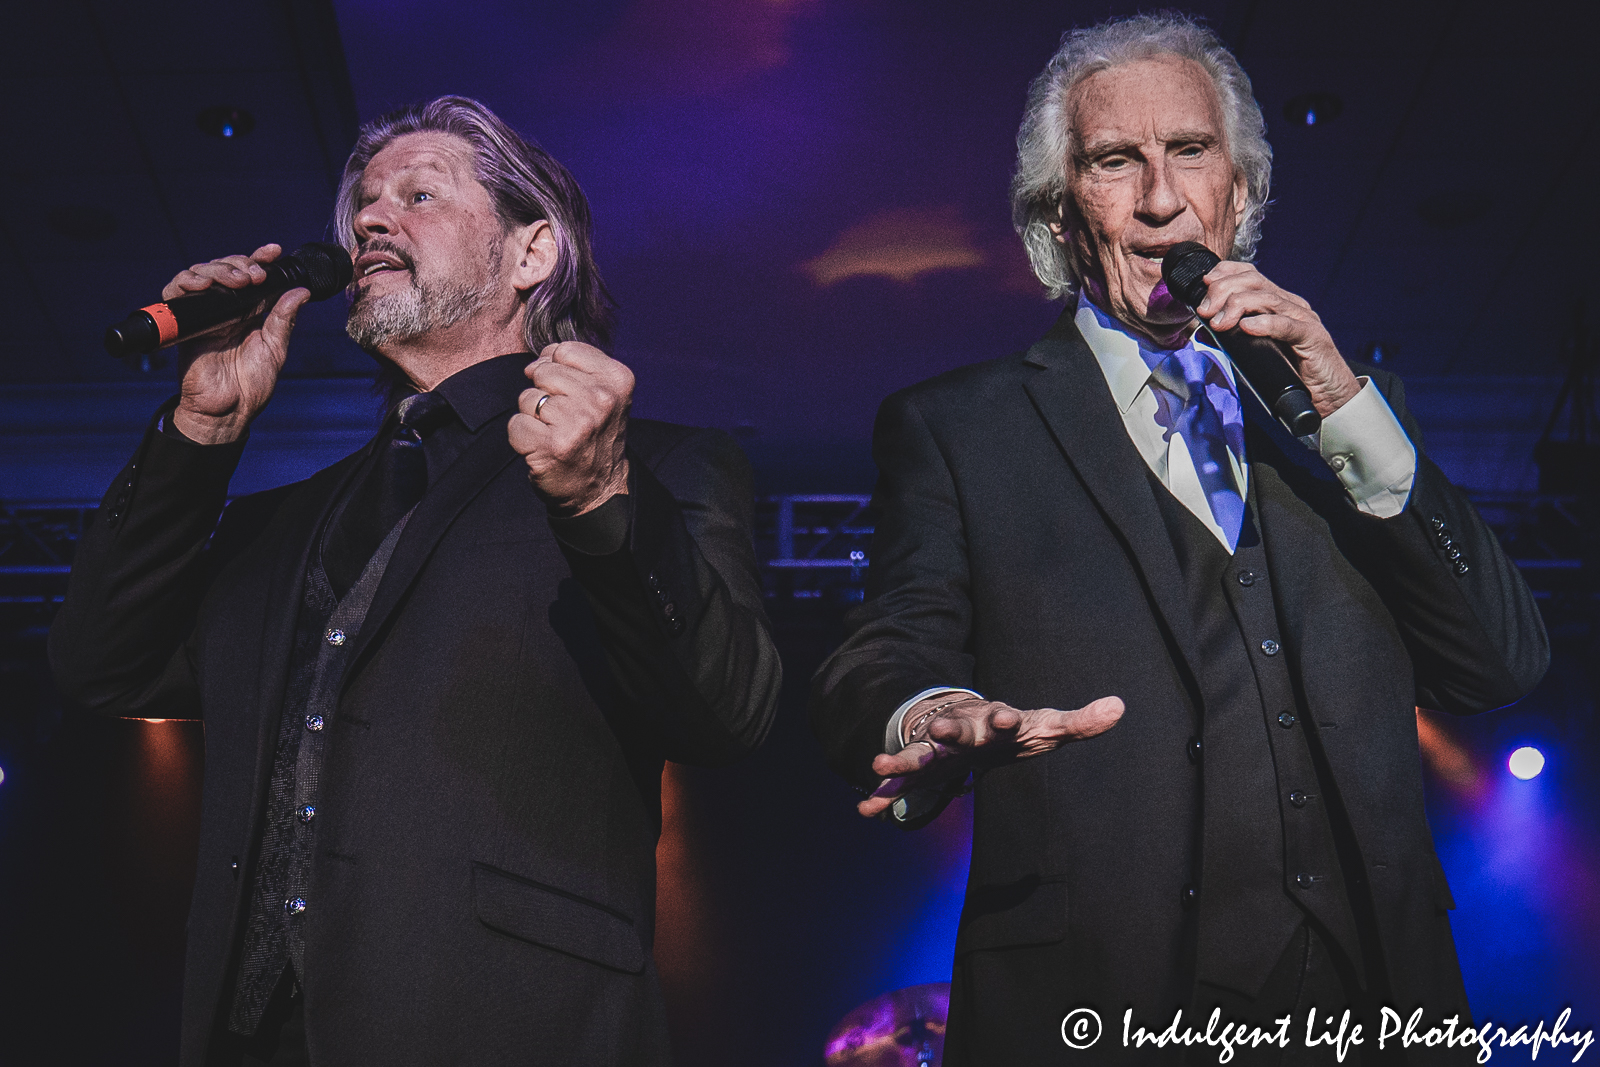 Righteous Brothers duo Bill Medley and Bucky Heard performing together at Prairie Band Casino in Mayetta, KS on June 29, 2023.